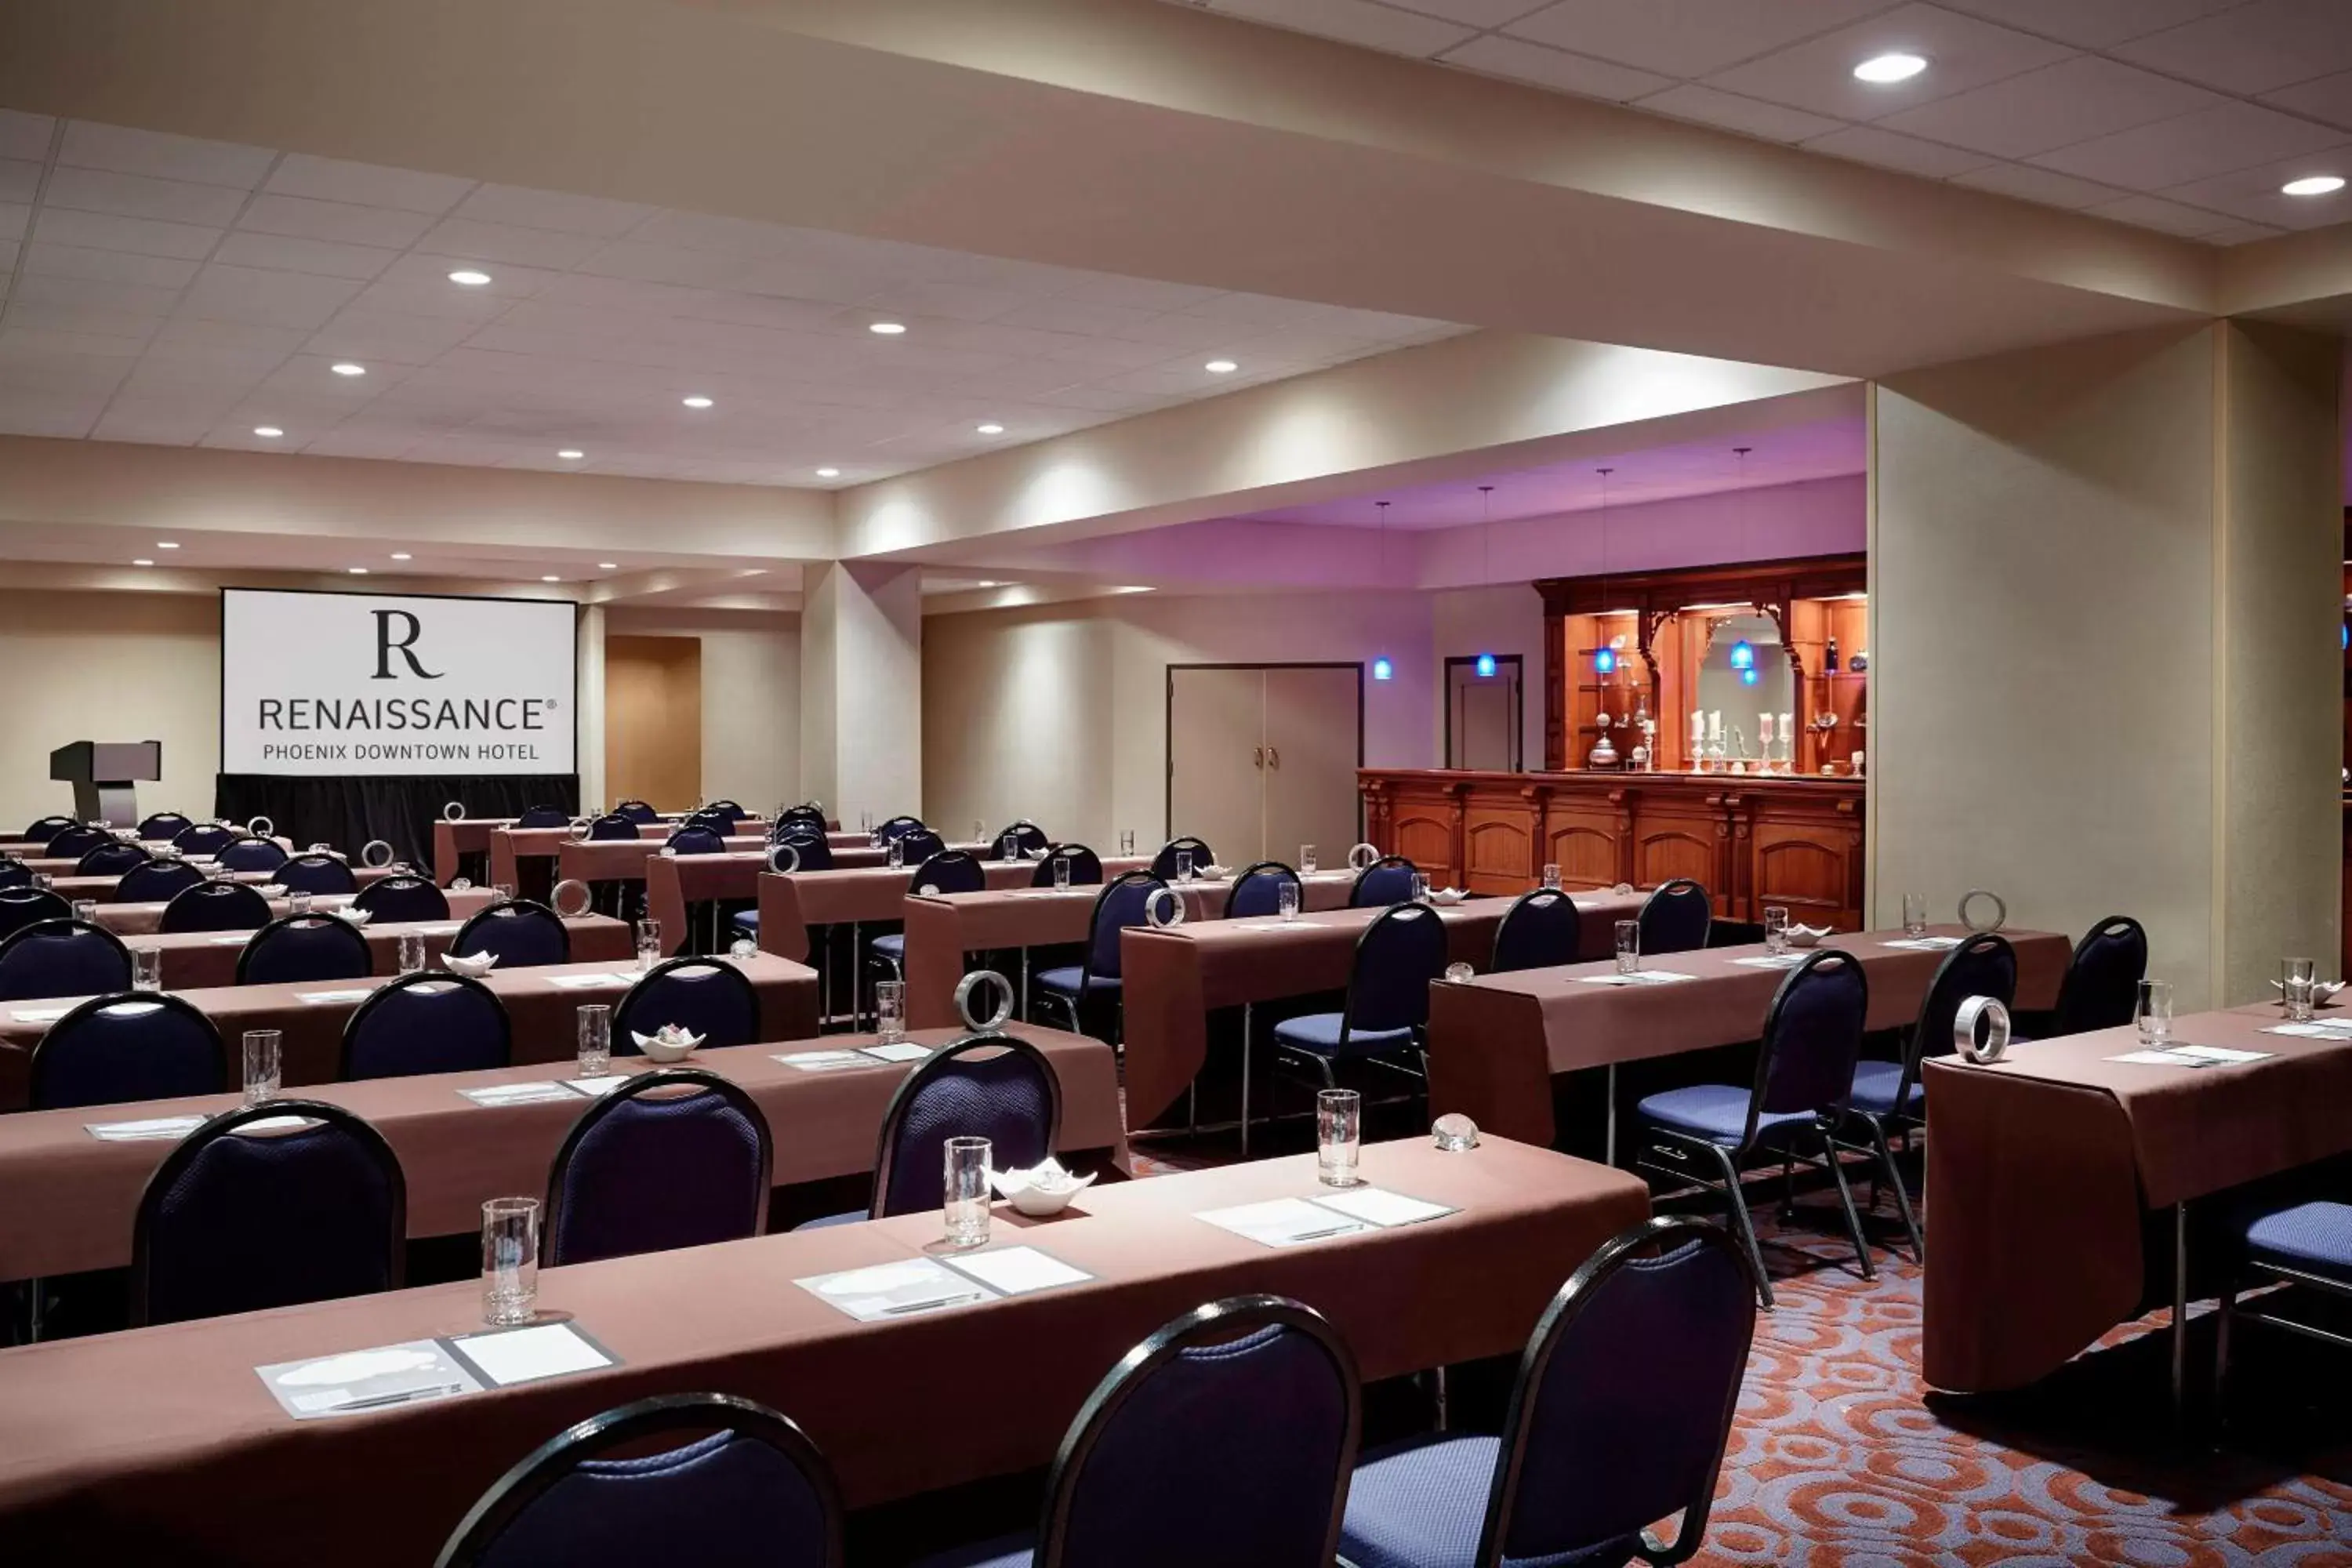 Meeting/conference room in Renaissance Phoenix Downtown Hotel